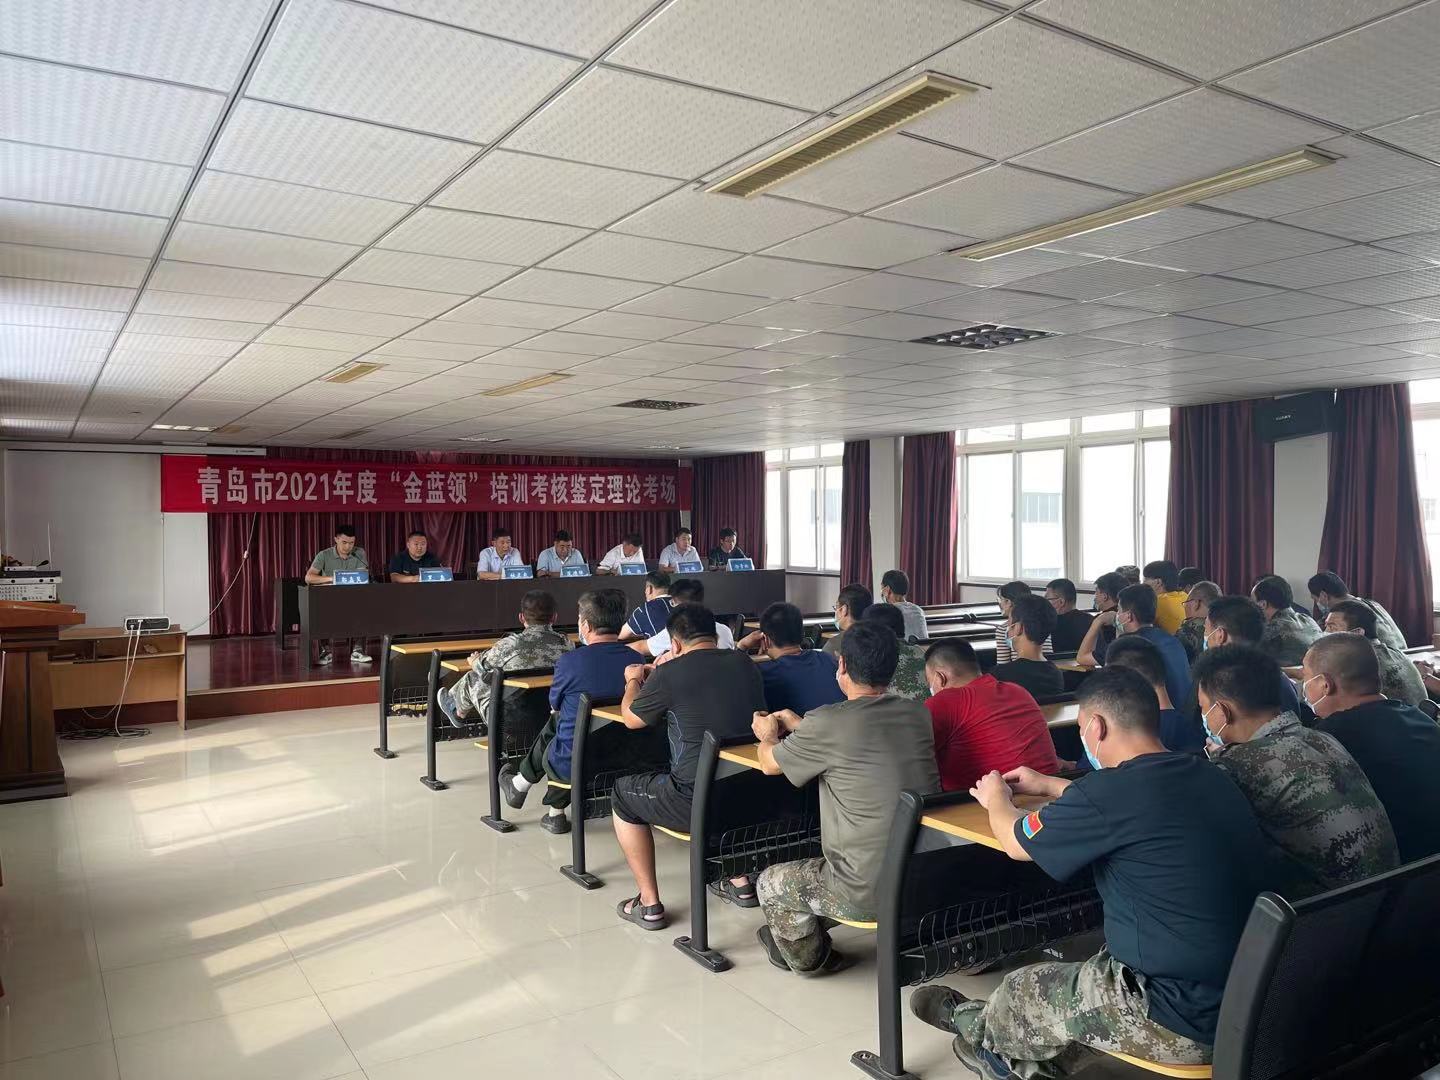 Jianhua Company's 2021 Safety Production Conference